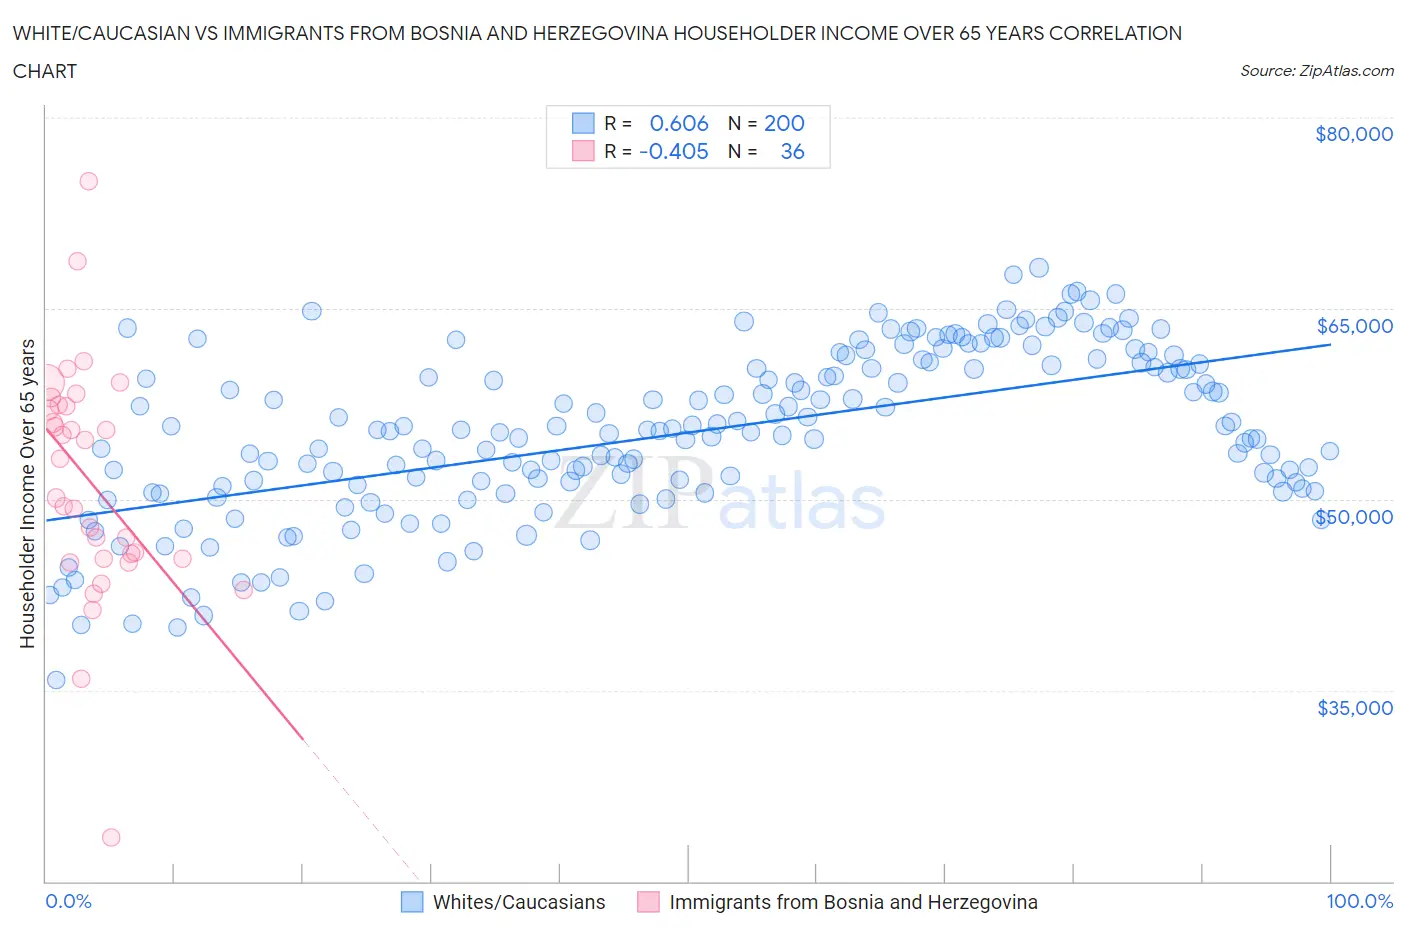 White/Caucasian vs Immigrants from Bosnia and Herzegovina Householder Income Over 65 years